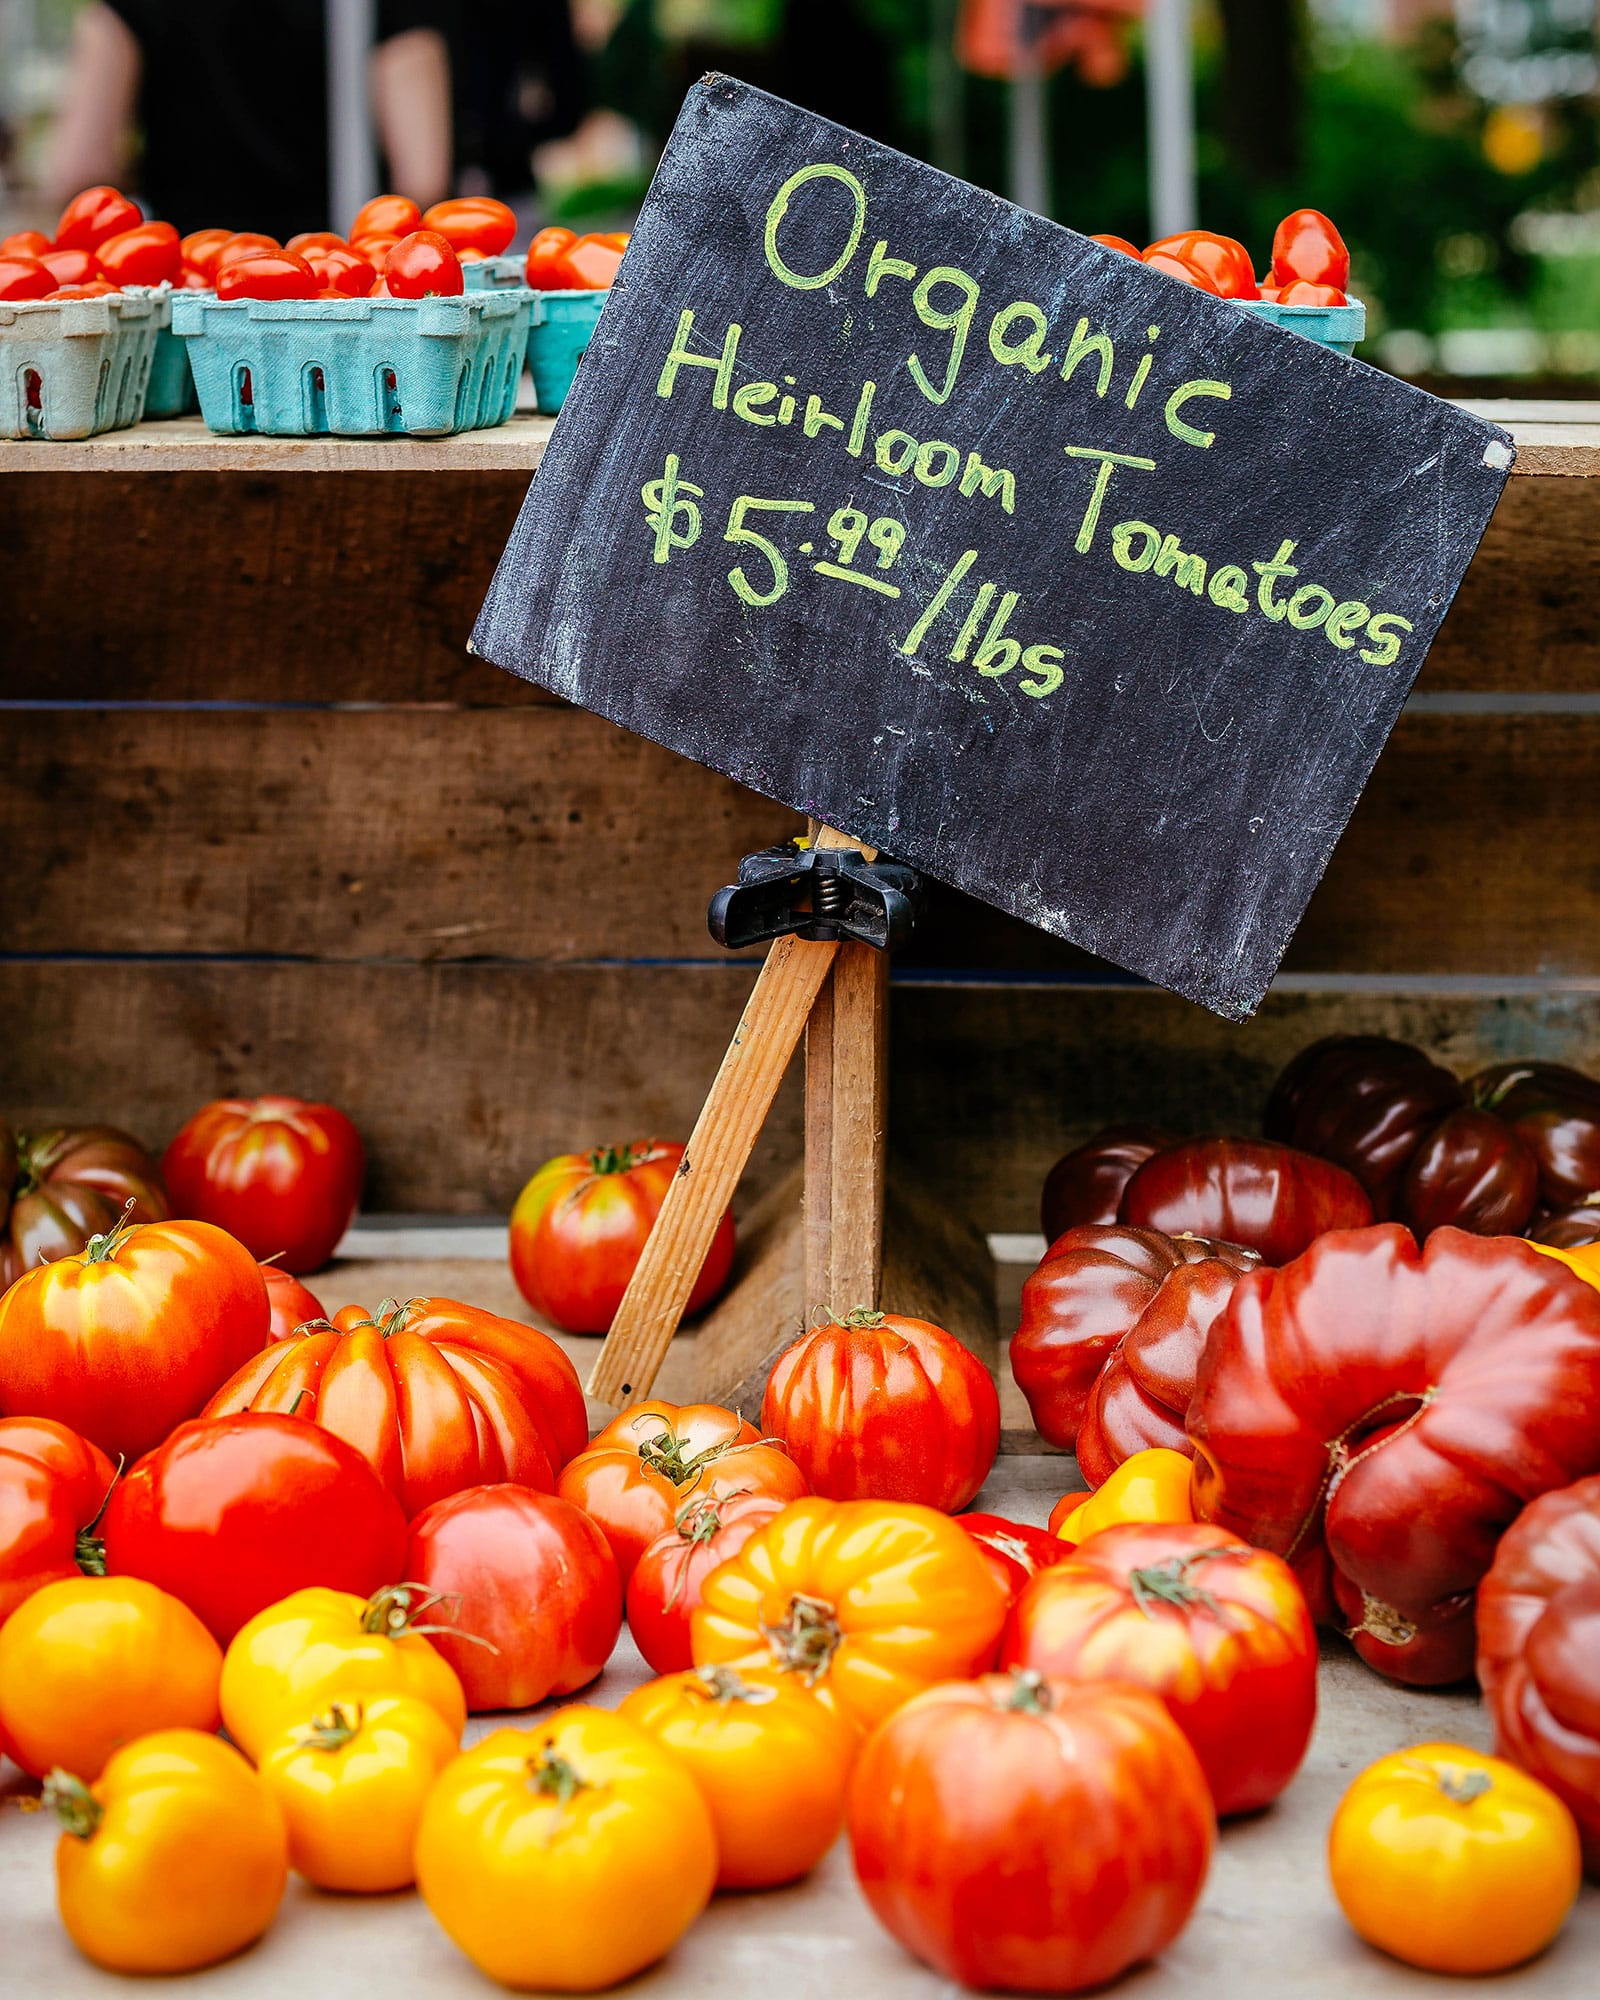 Heirloom tomatoes on display at a farmers' market stall with a chalkboard sign showing the price